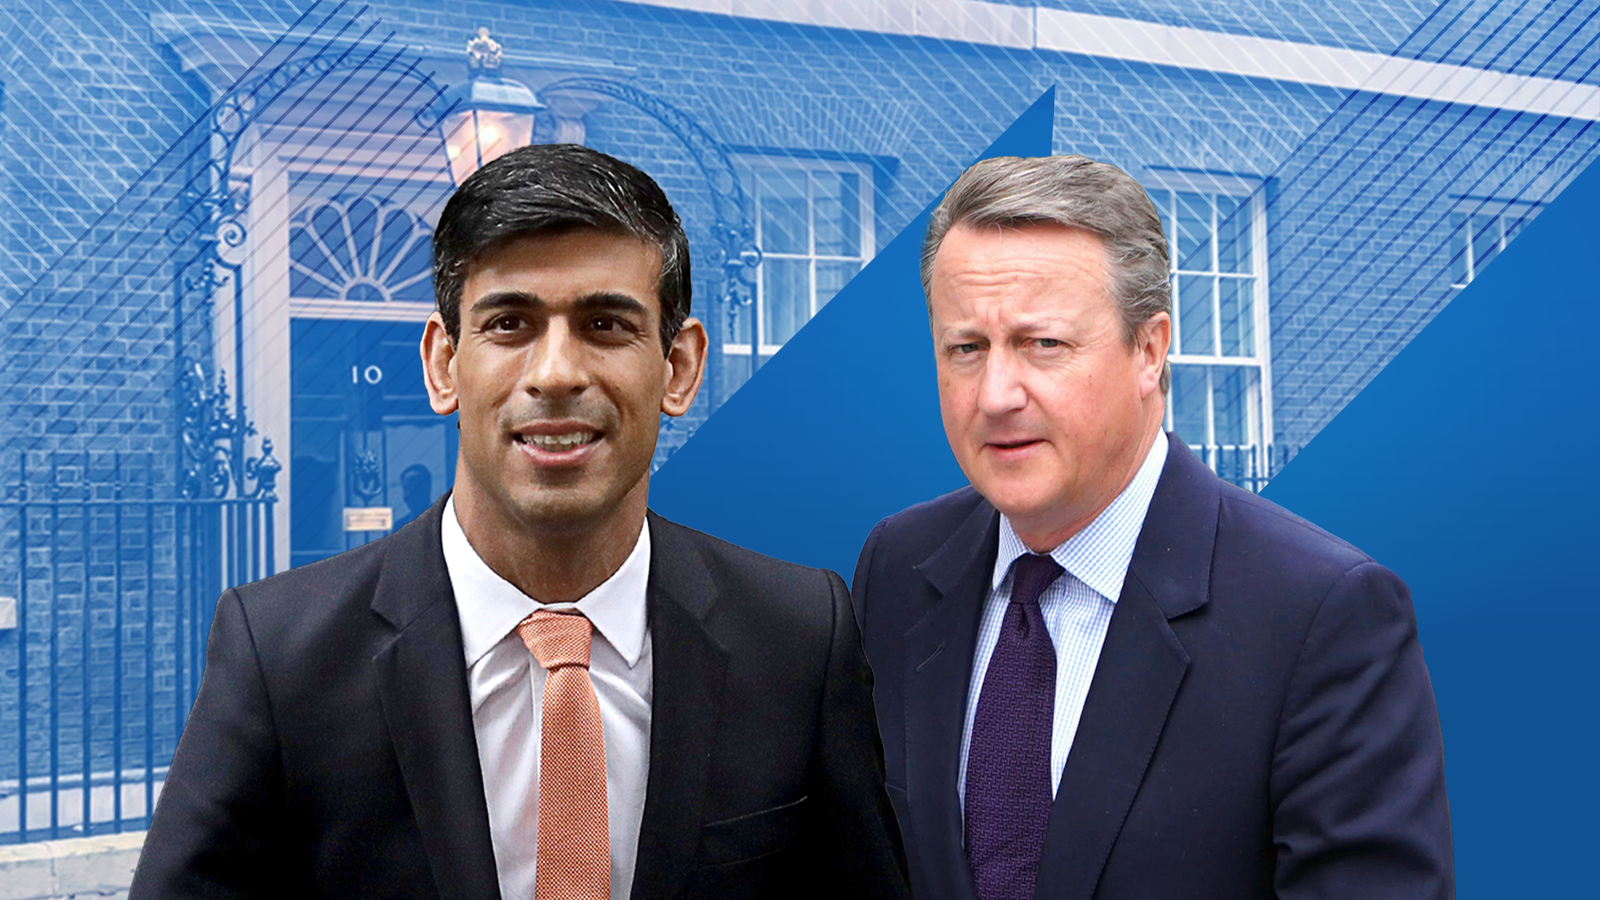 Rishi Sunak's claim to be 'change candidate' is tested by return of David Cameron